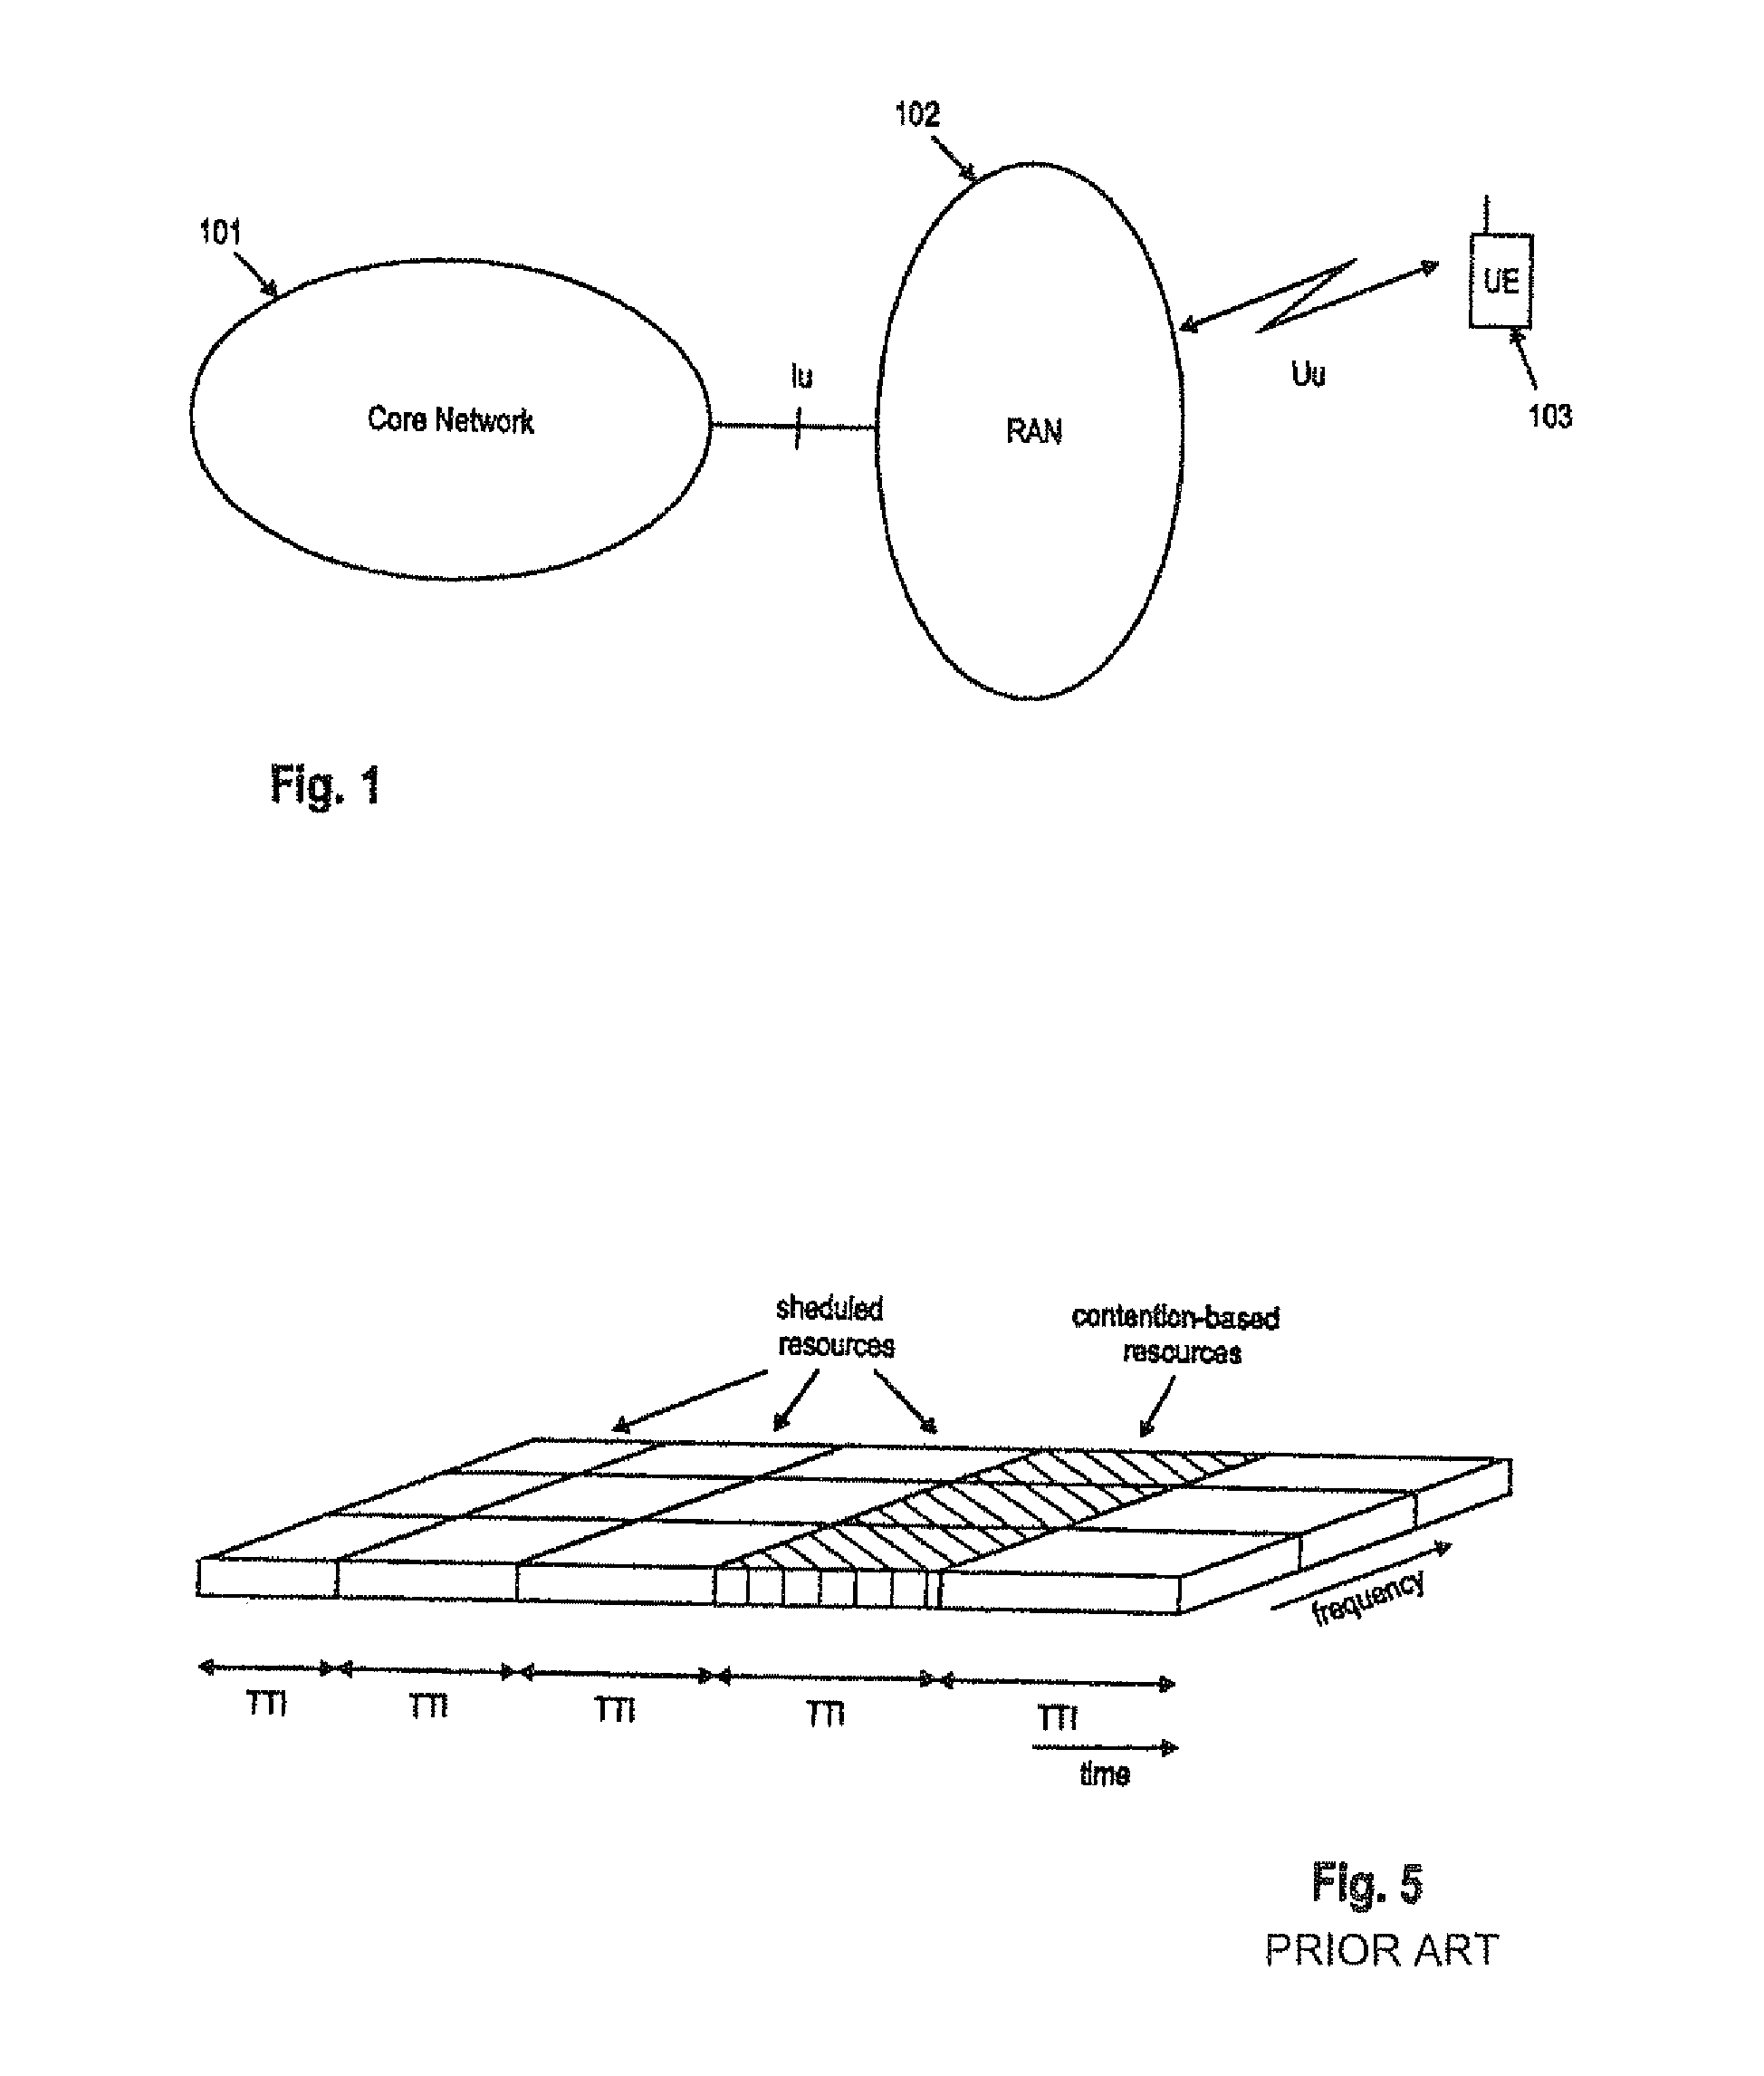 Uplink resource allocation in a mobile communication system